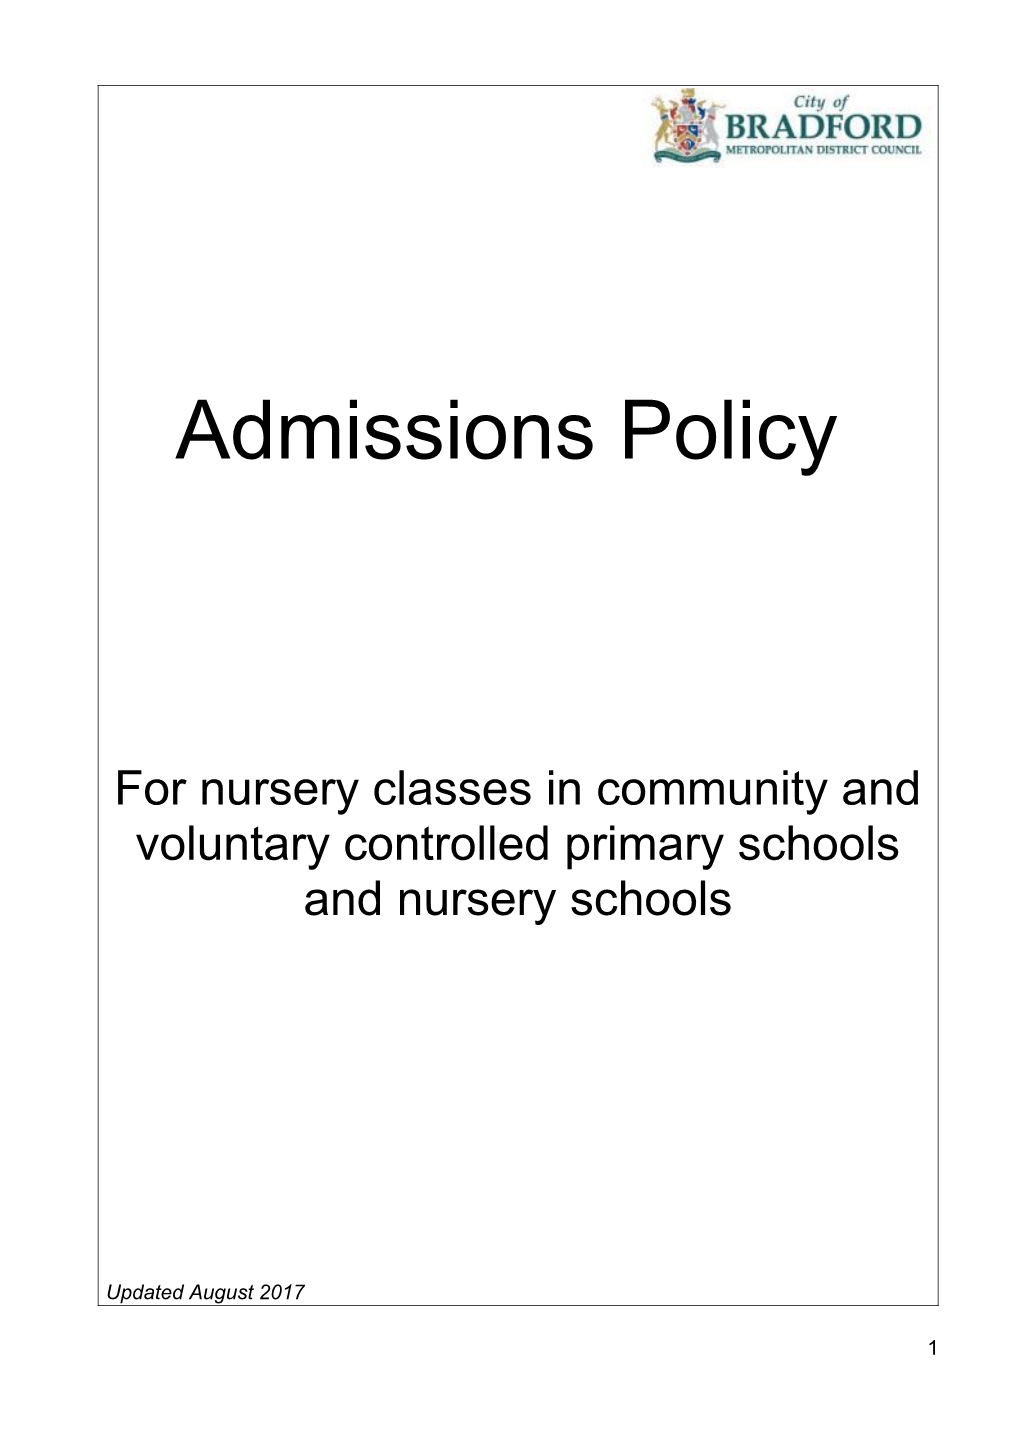 For Nursery Classes in Community and Voluntary Controlled Primary Schools and Nursery Schools